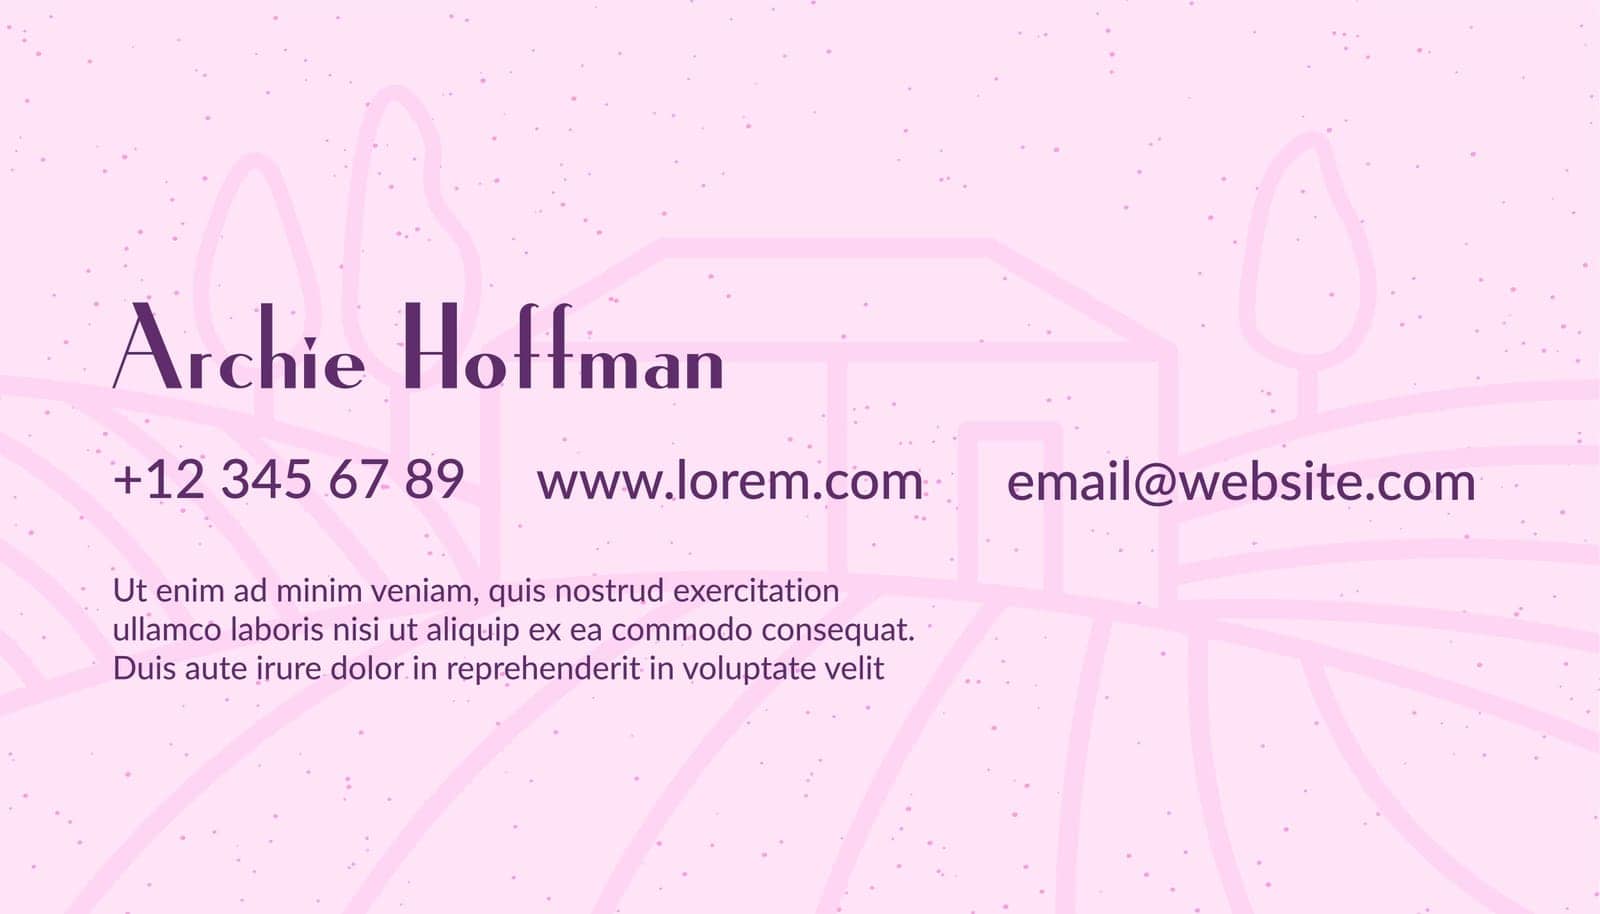 Visiting or business card with personal information, phone number, and website address. Info about organization or services, vineyard or farm on background, wine making. Vector in flat style